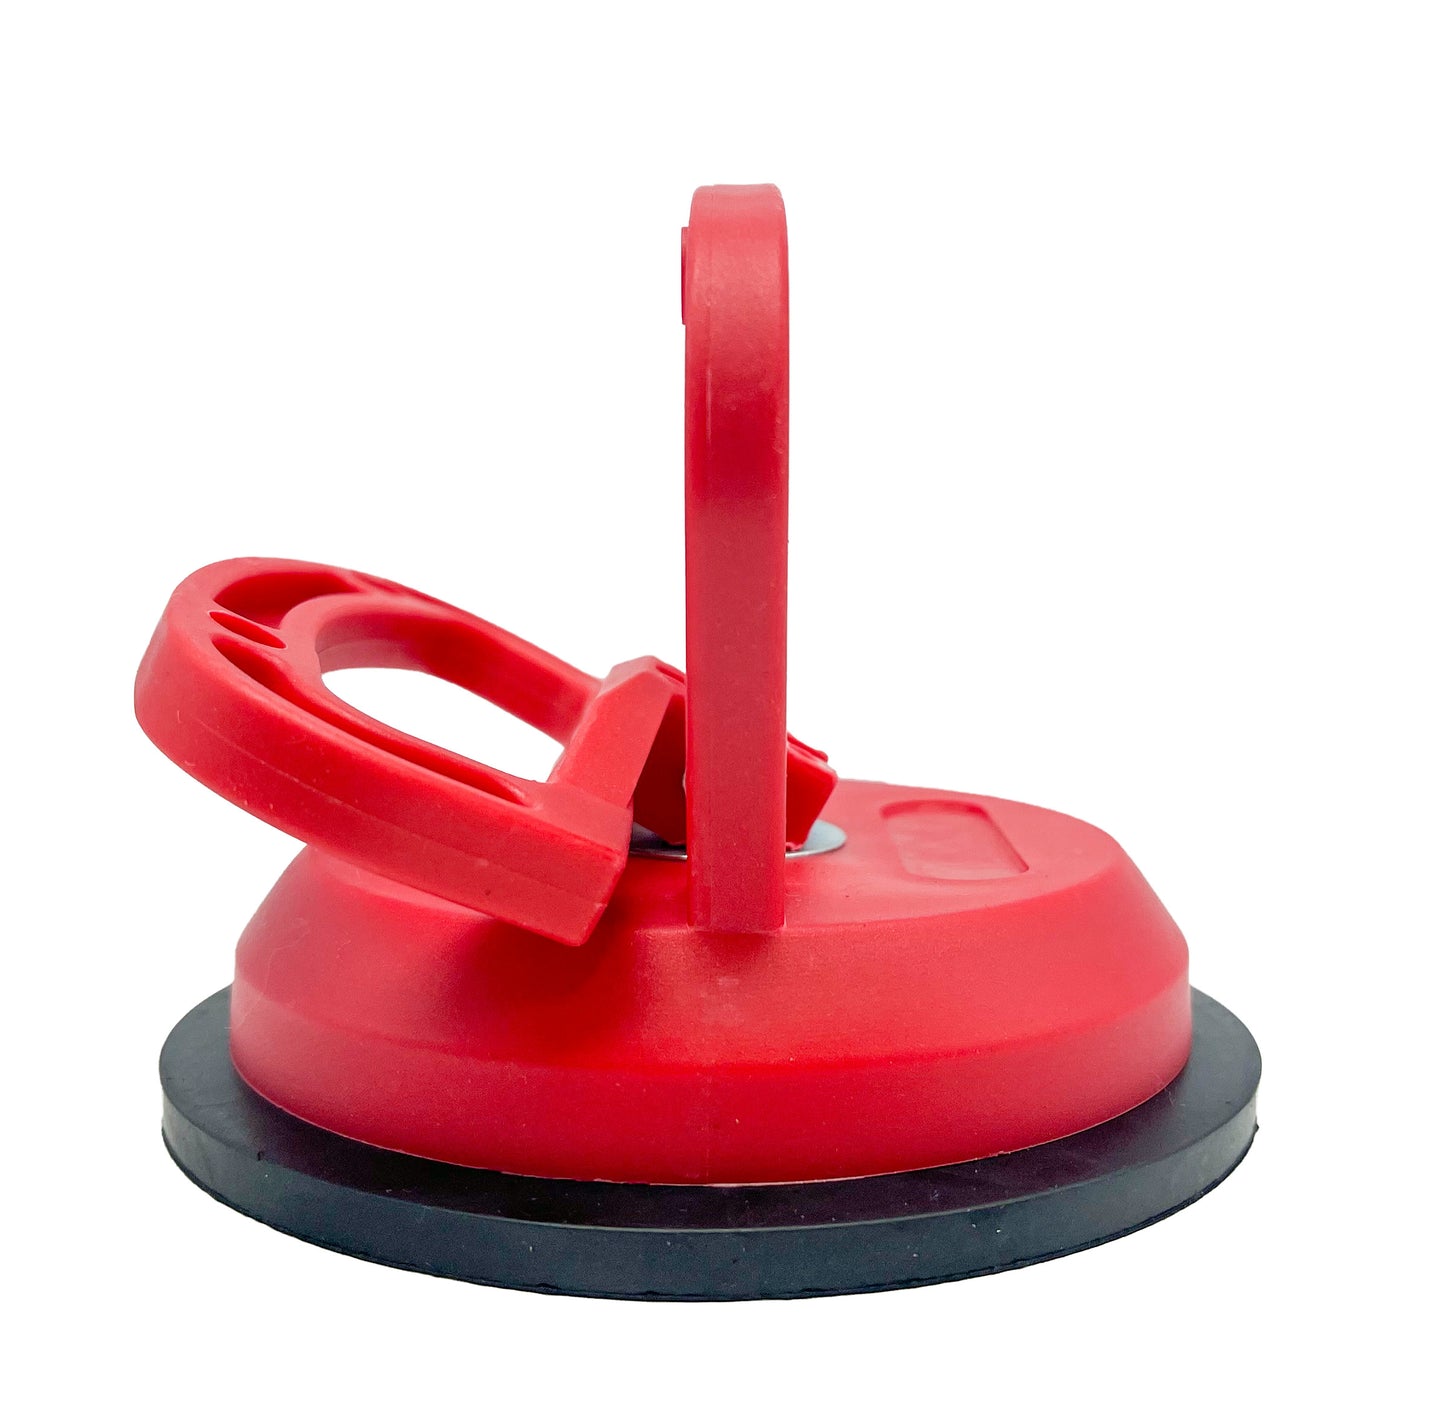 Power Maxx Double Handle Locking Heavy Duty Suction Plastic Cup